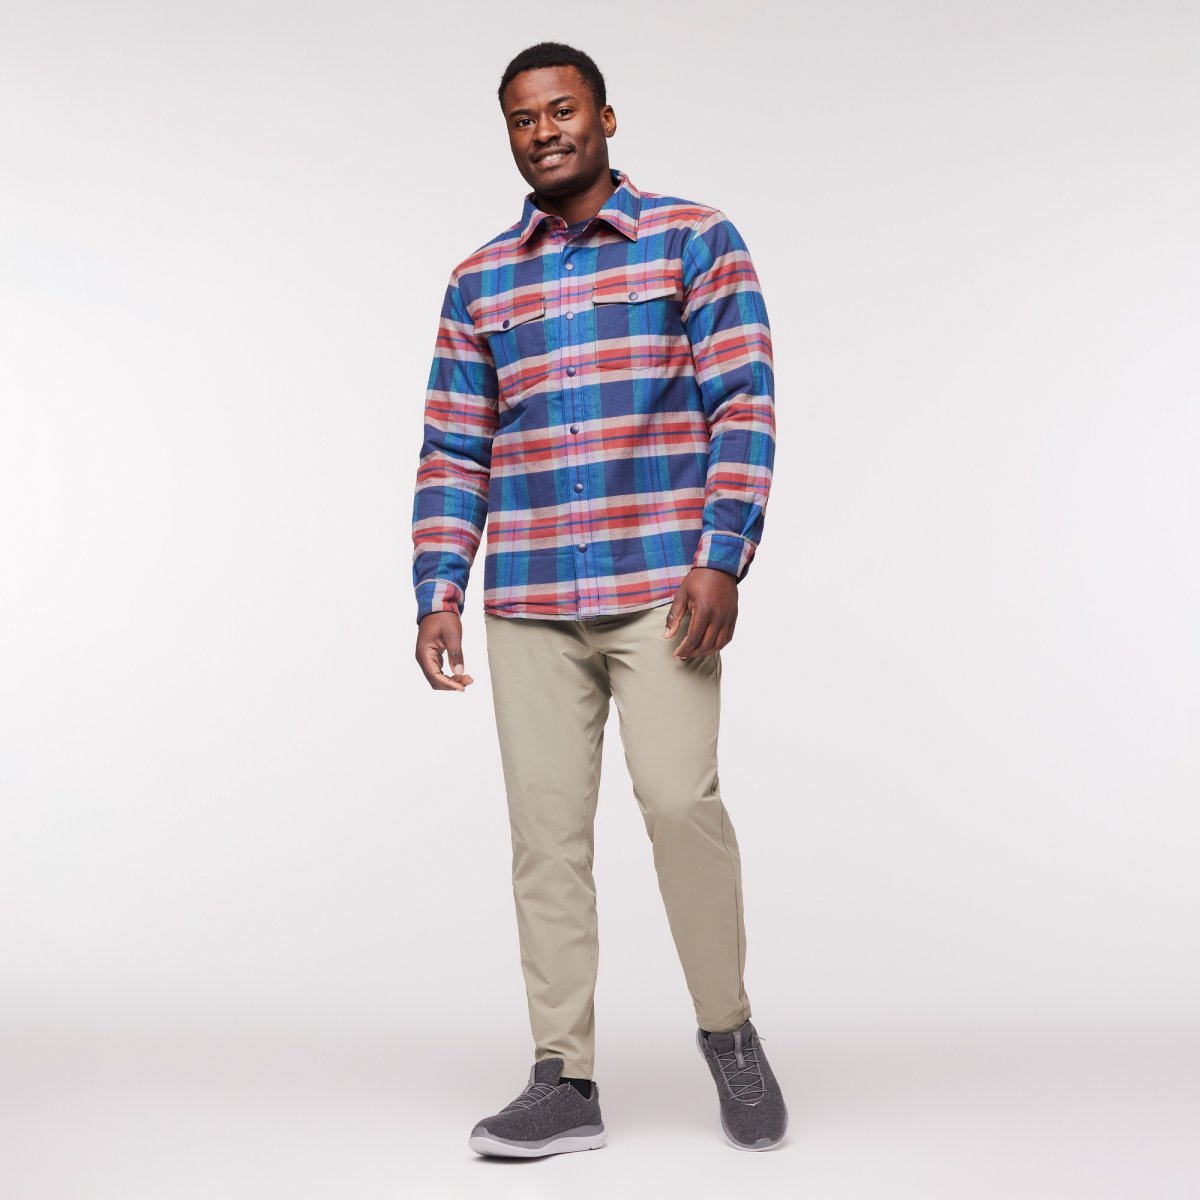 Salto Insulated Flannel Jacket M